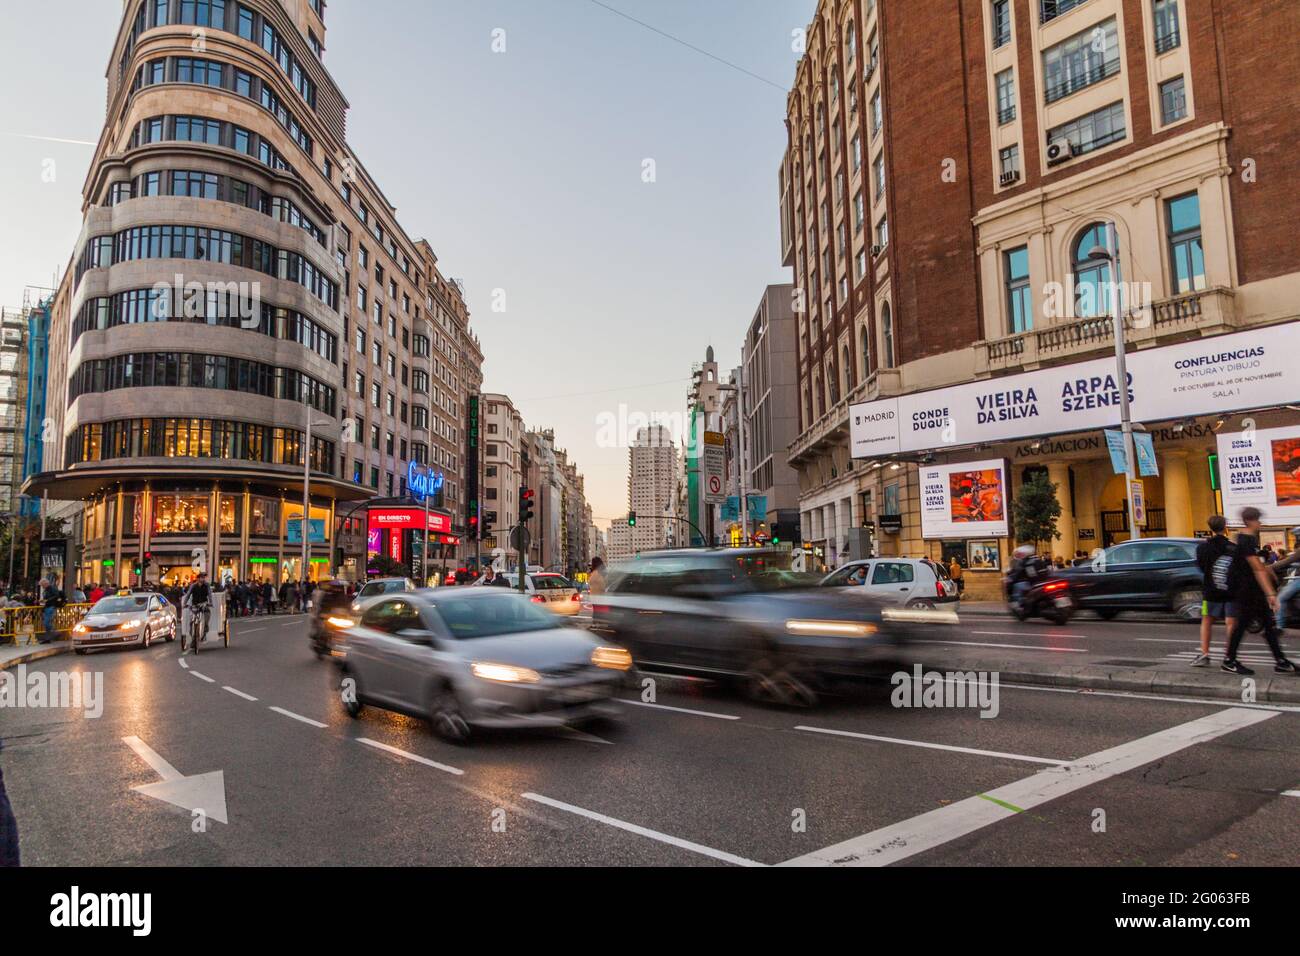 MADRID, SPAIN - OCTOBER 21, 2017: Calle Gran Via street and Carrion Building in Madrid. Stock Photo